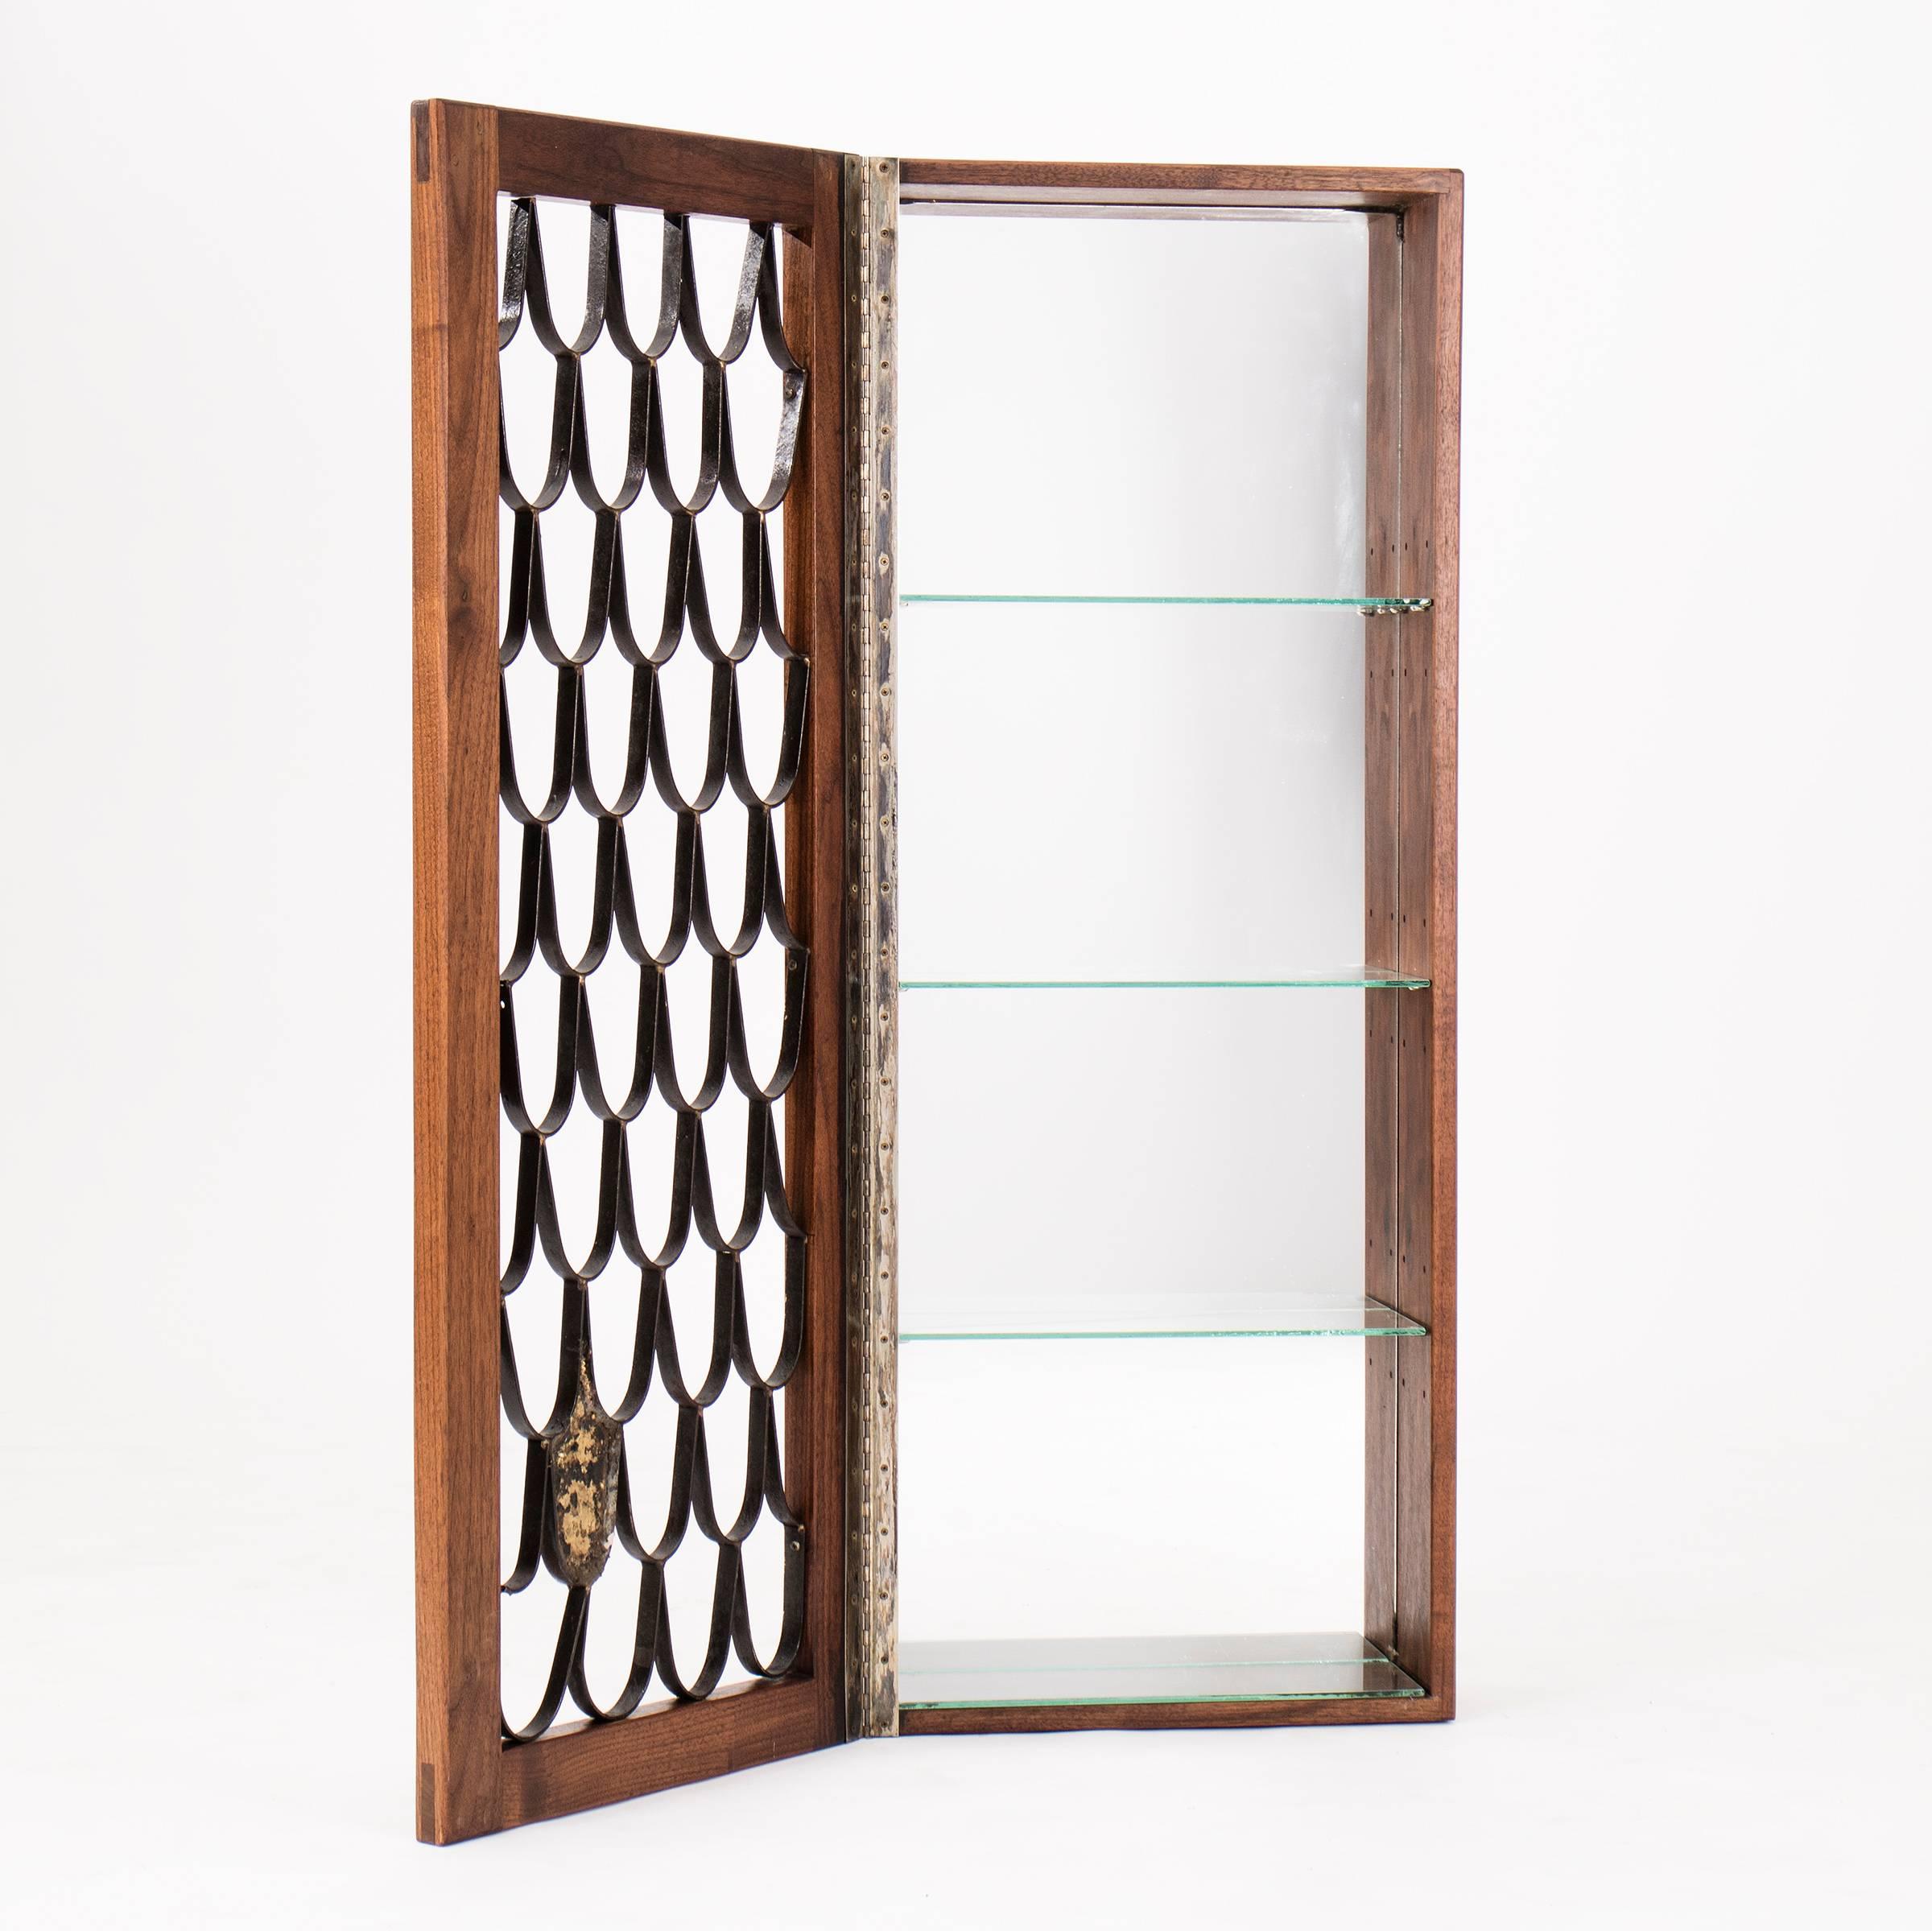 Early collaboration from Paul Evans Studio and Phillip Lloyd Powell. Piano hinged door with fish scale screen, adjustable glass shelves and mirrored back panel. Wall-mounted by French cleat.